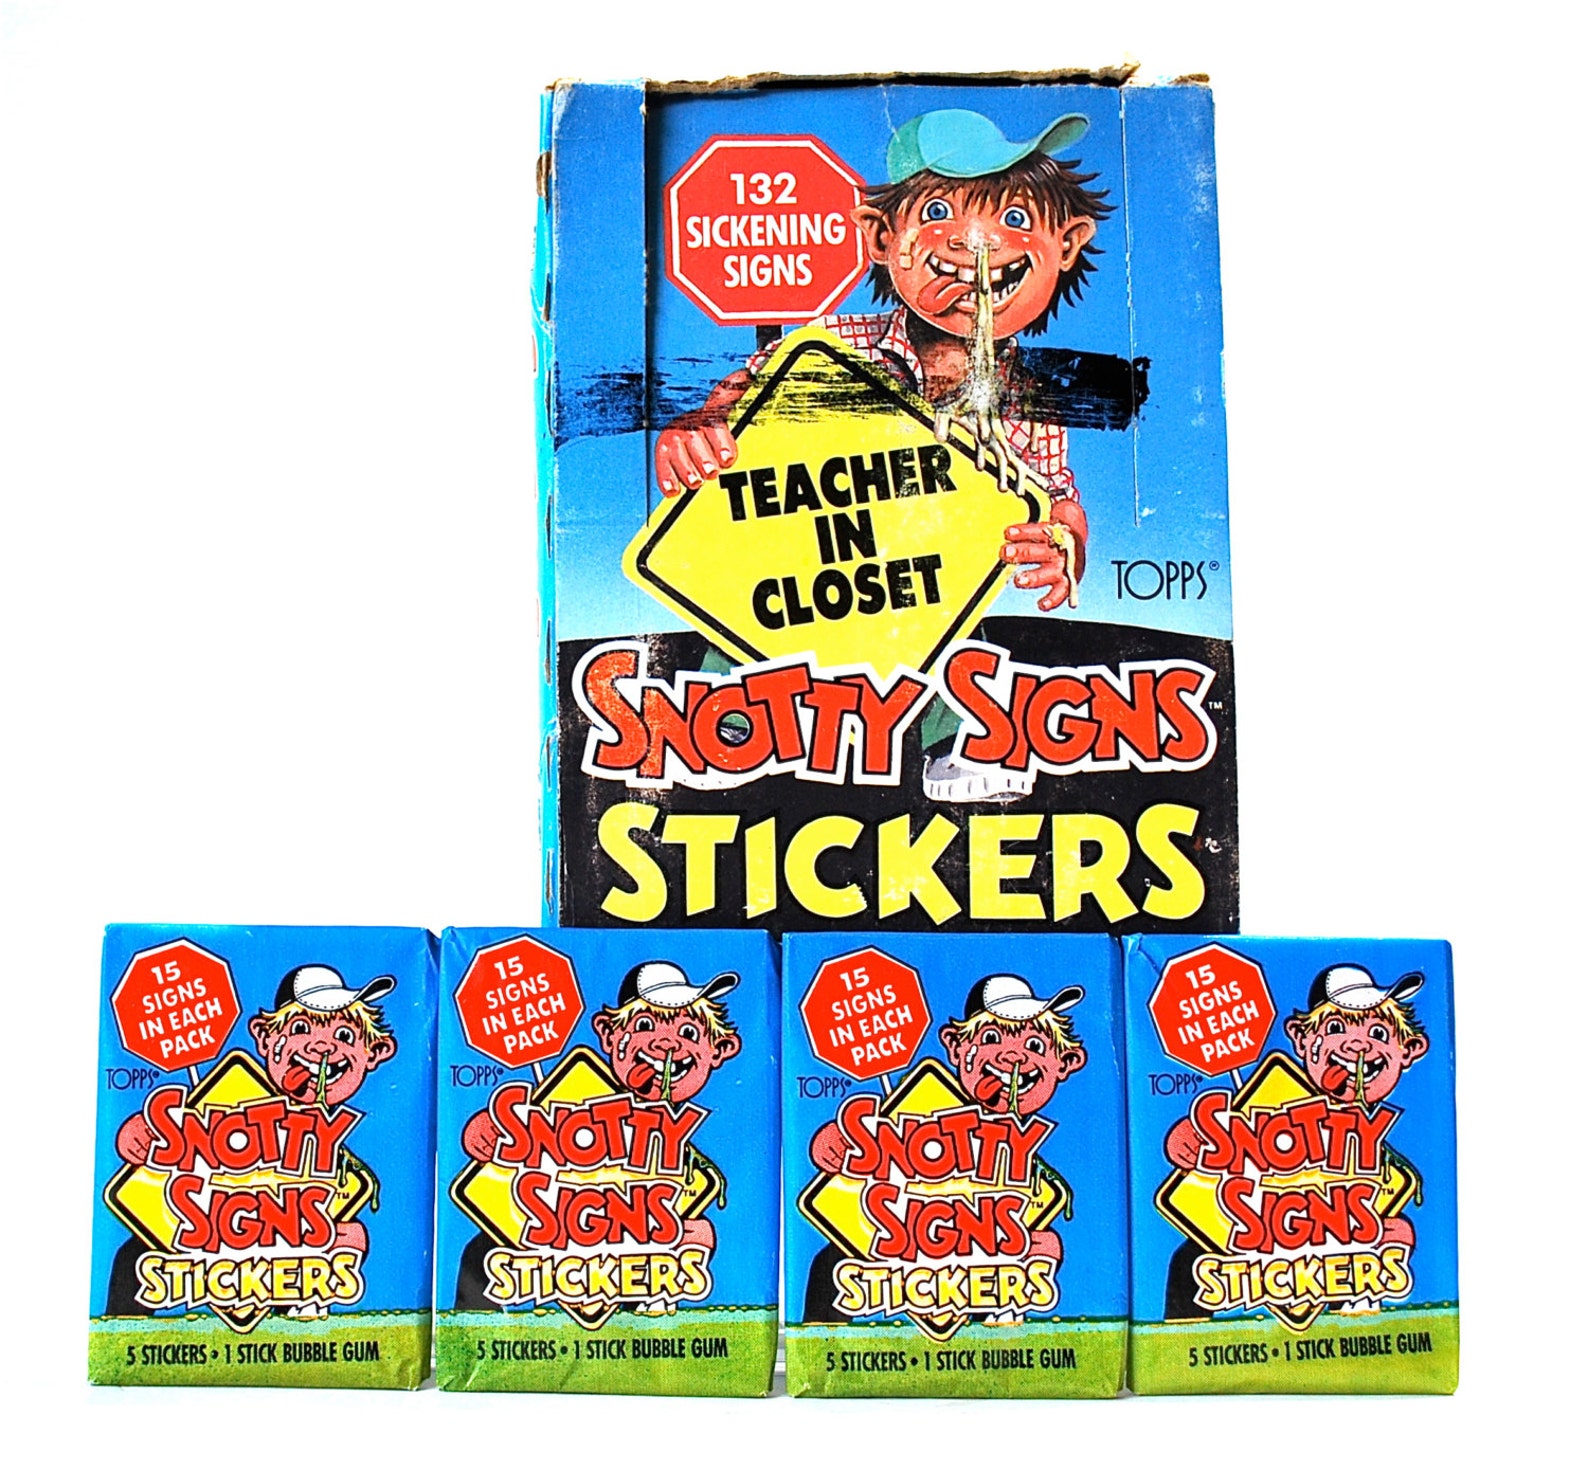 4 Snotty Signs Sticker Packs by Topps 1986 | Etsy